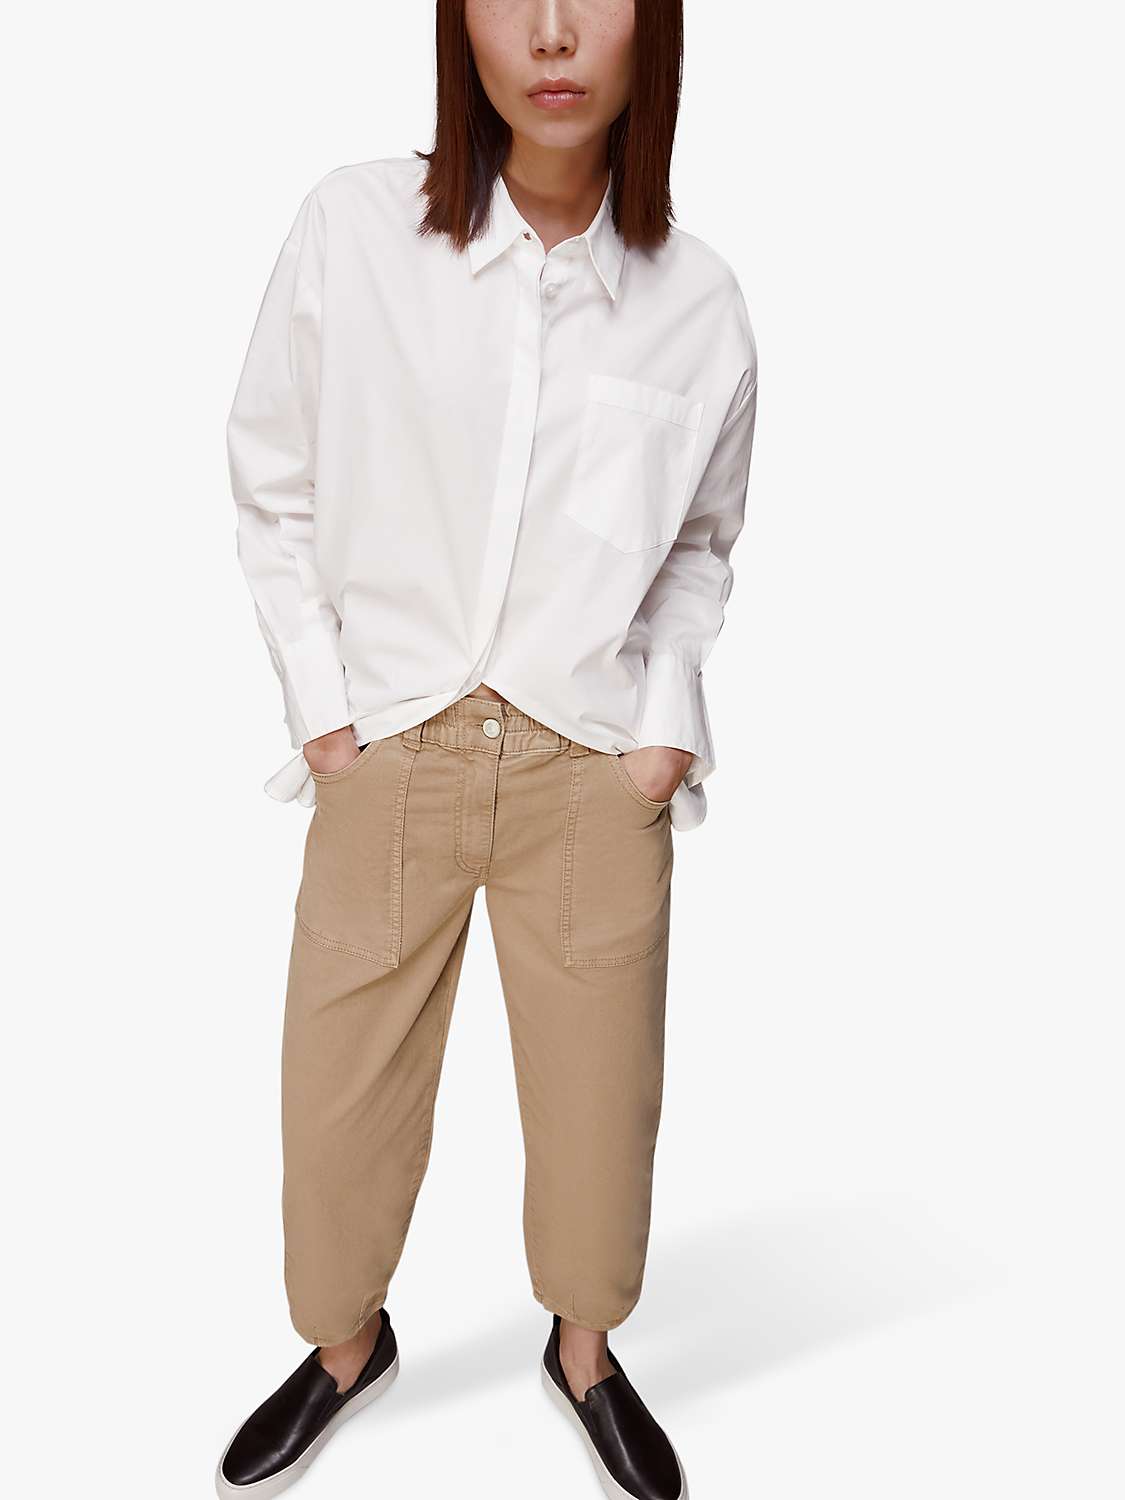 Buy Whistles Tessa Casual Trousers, Navy Online at johnlewis.com